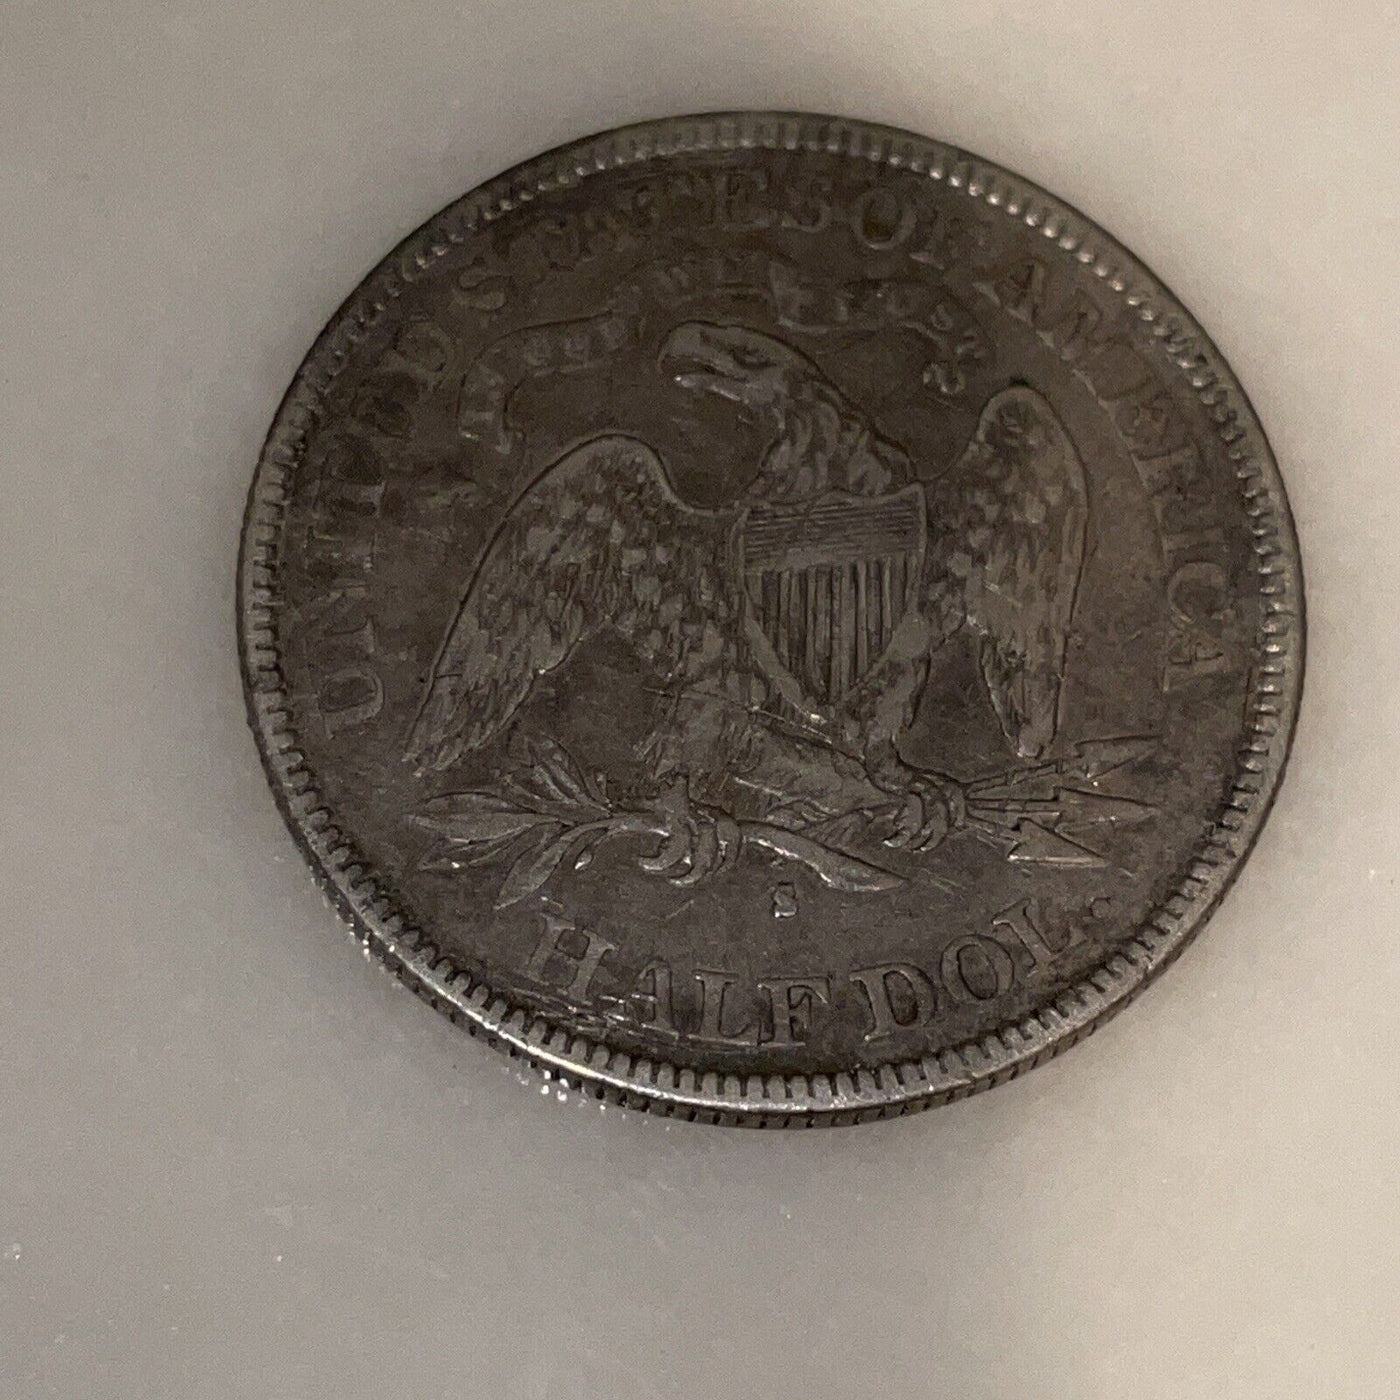 1877 s Seated Silver Half Extra Fine no problems collectible mmmm